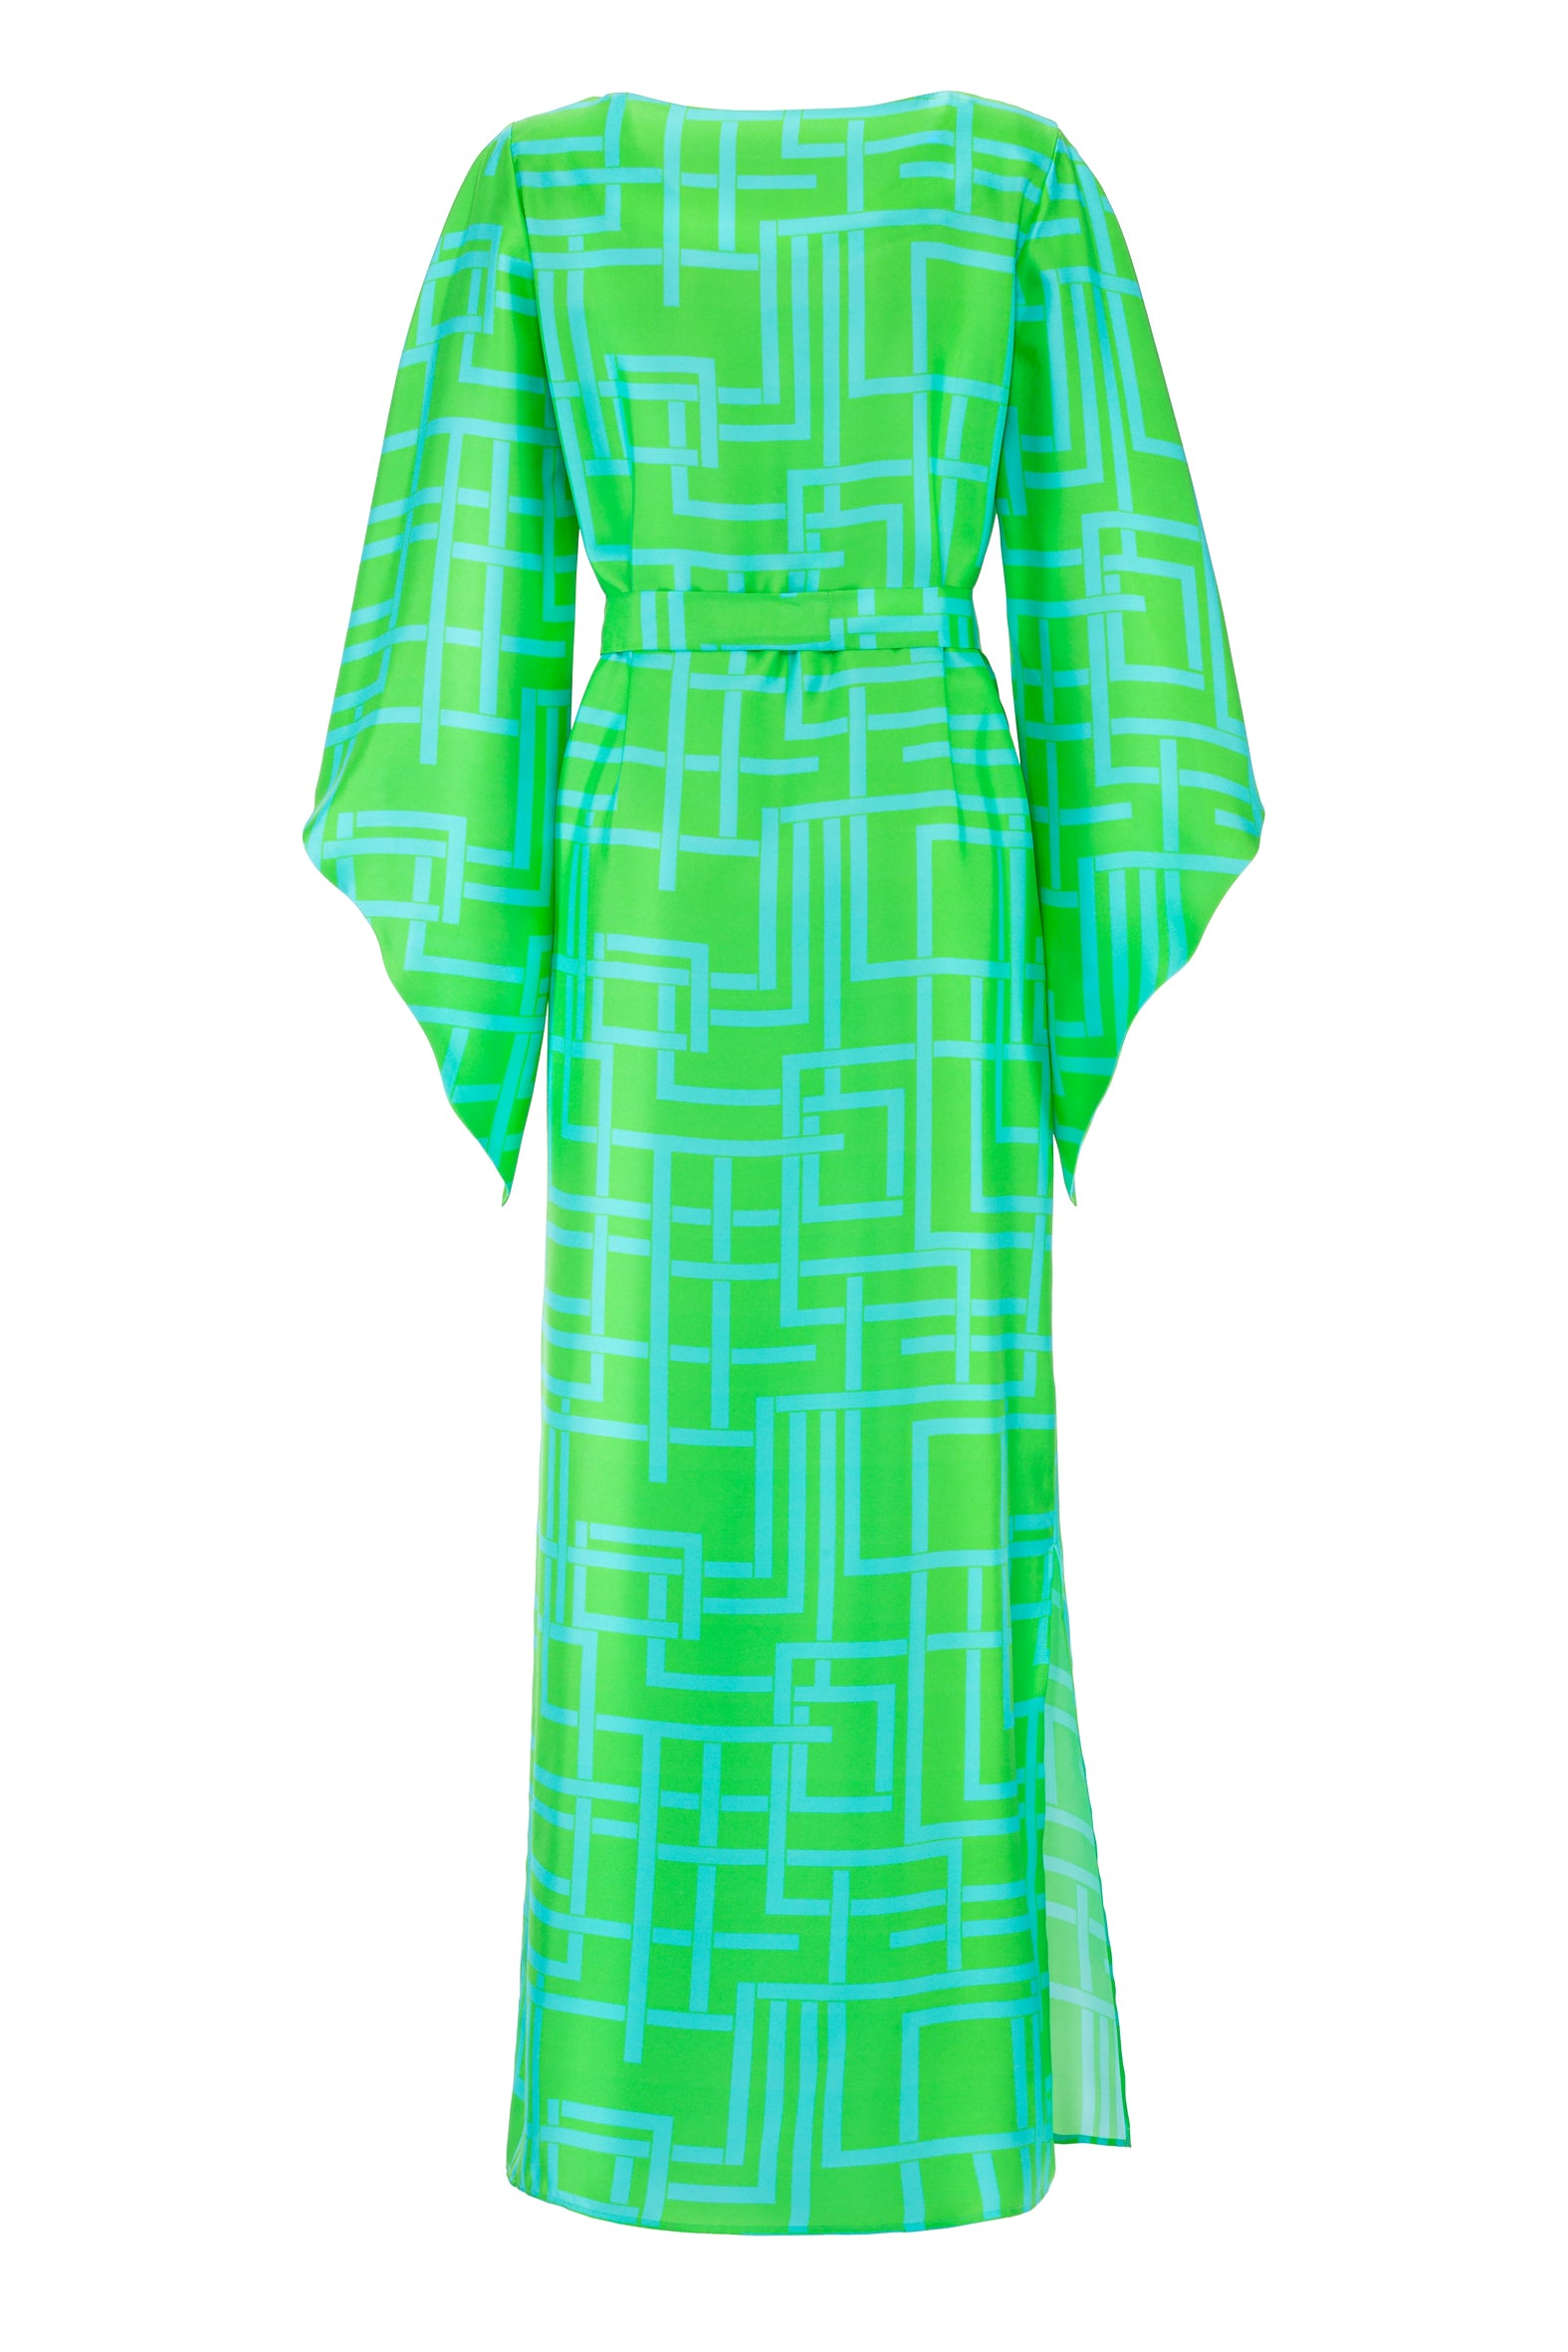 The Clarins Long Dress